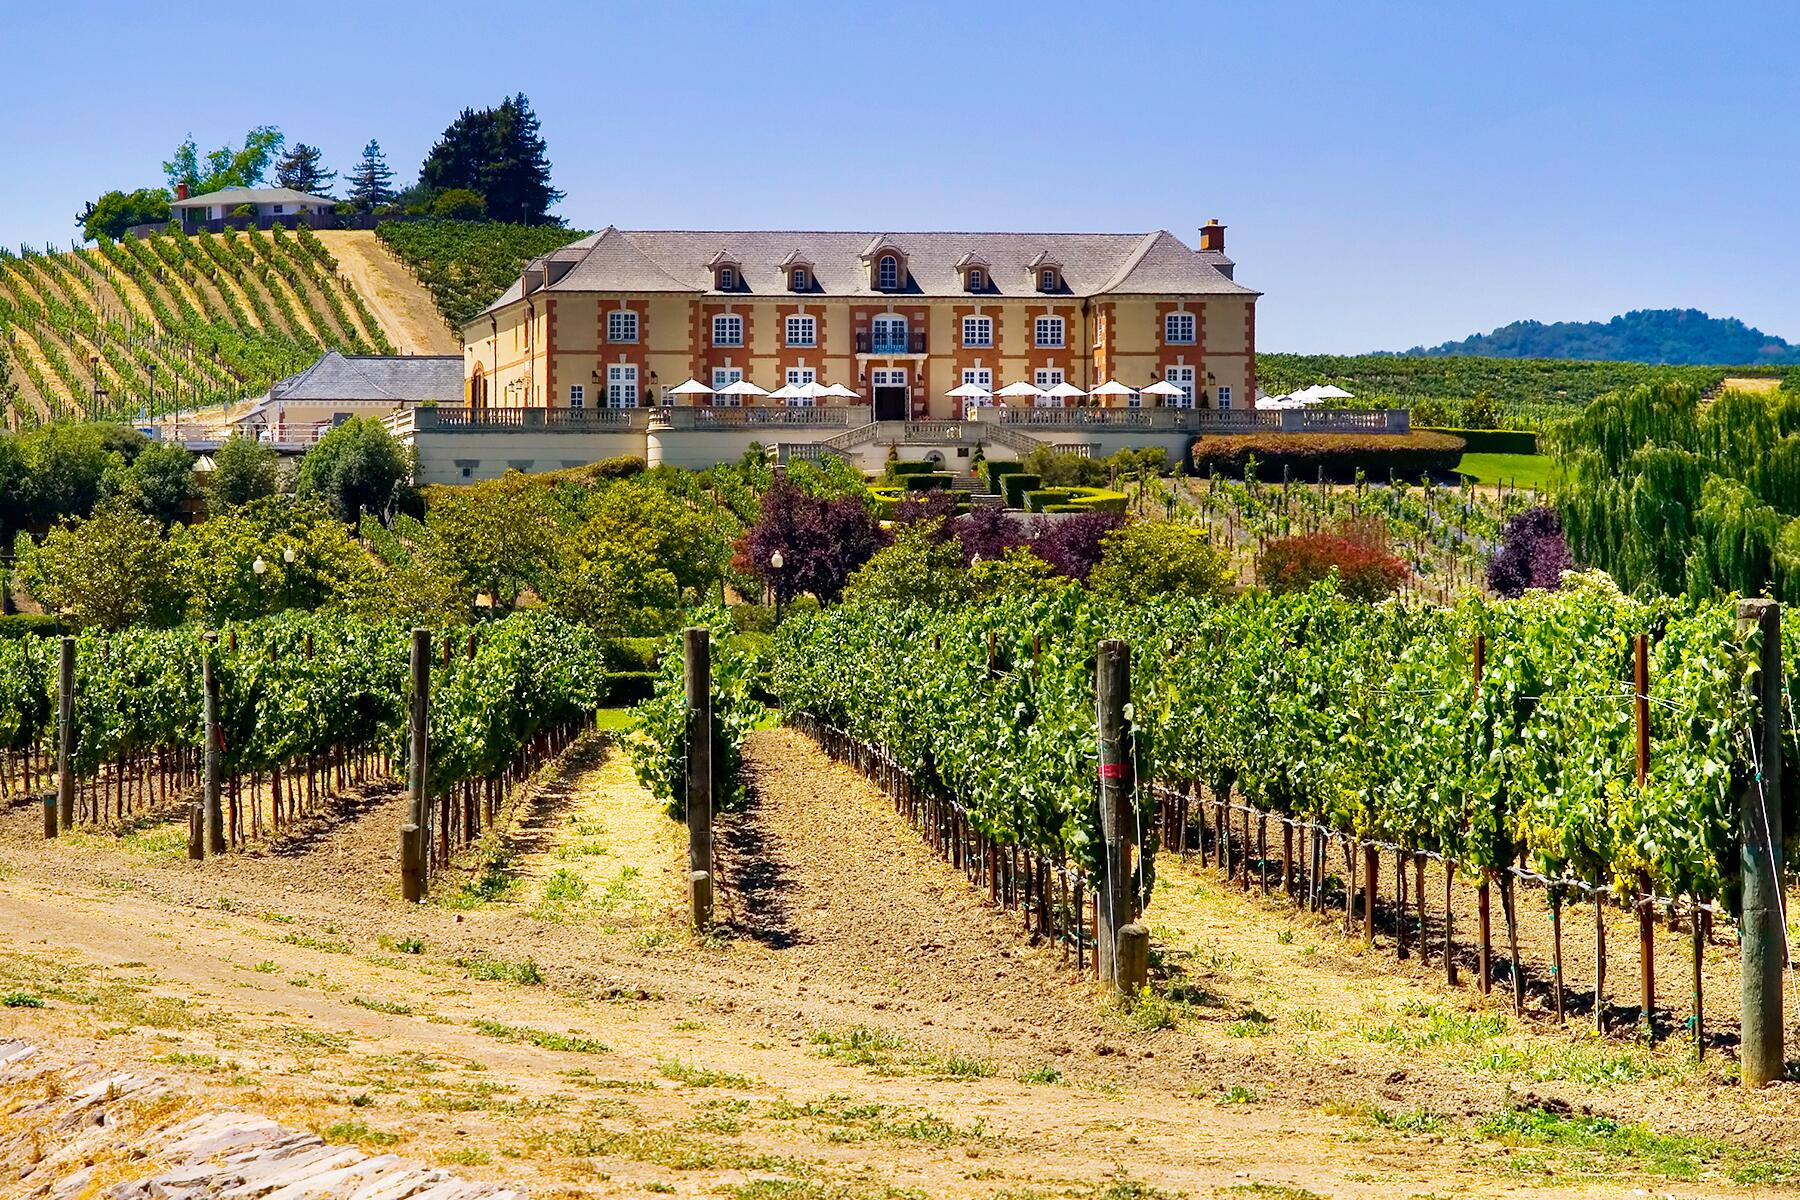 The Perfect 3-Day Weekend Road Trip Itinerary to Napa Valley, California